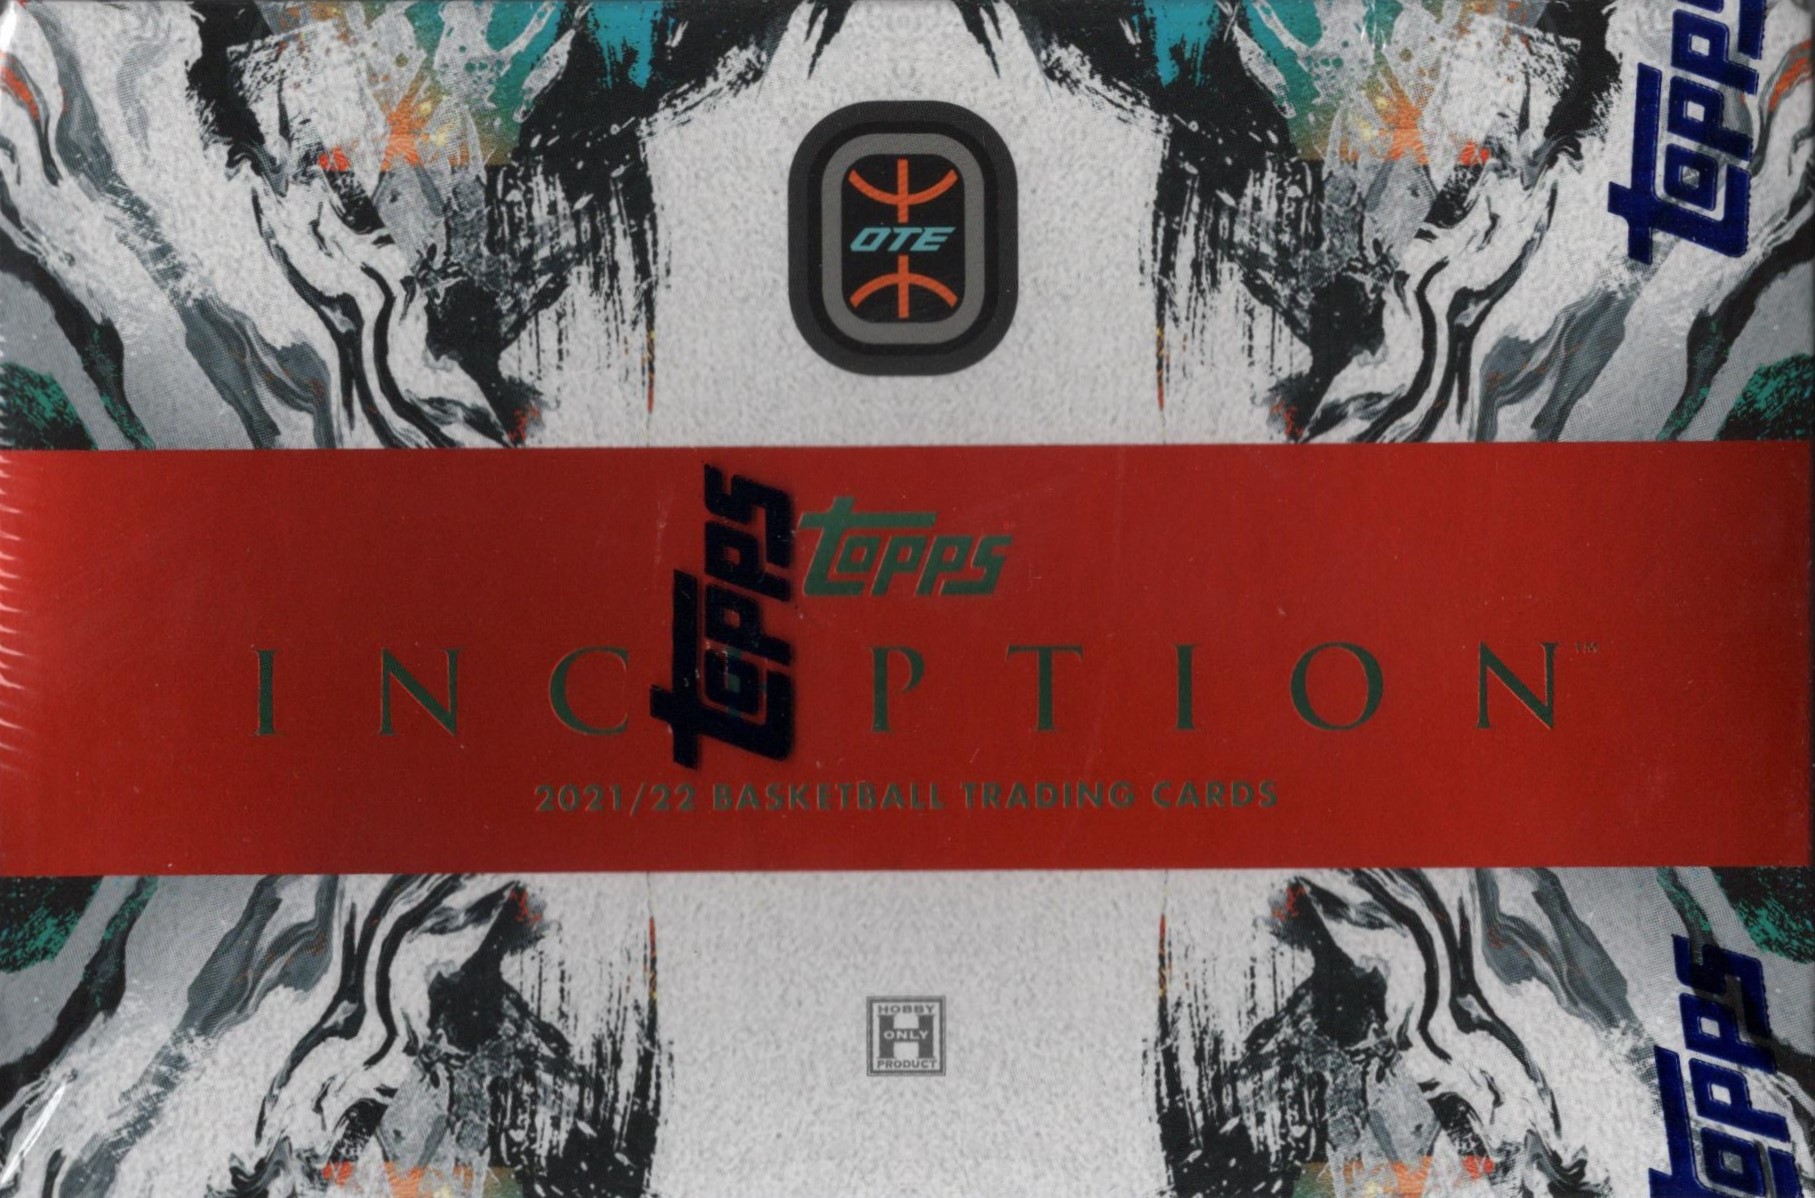 🏀 2021/22 TOPPS INCEPTION OVER TIME ELITE BASKETBALL【製品情報 ...